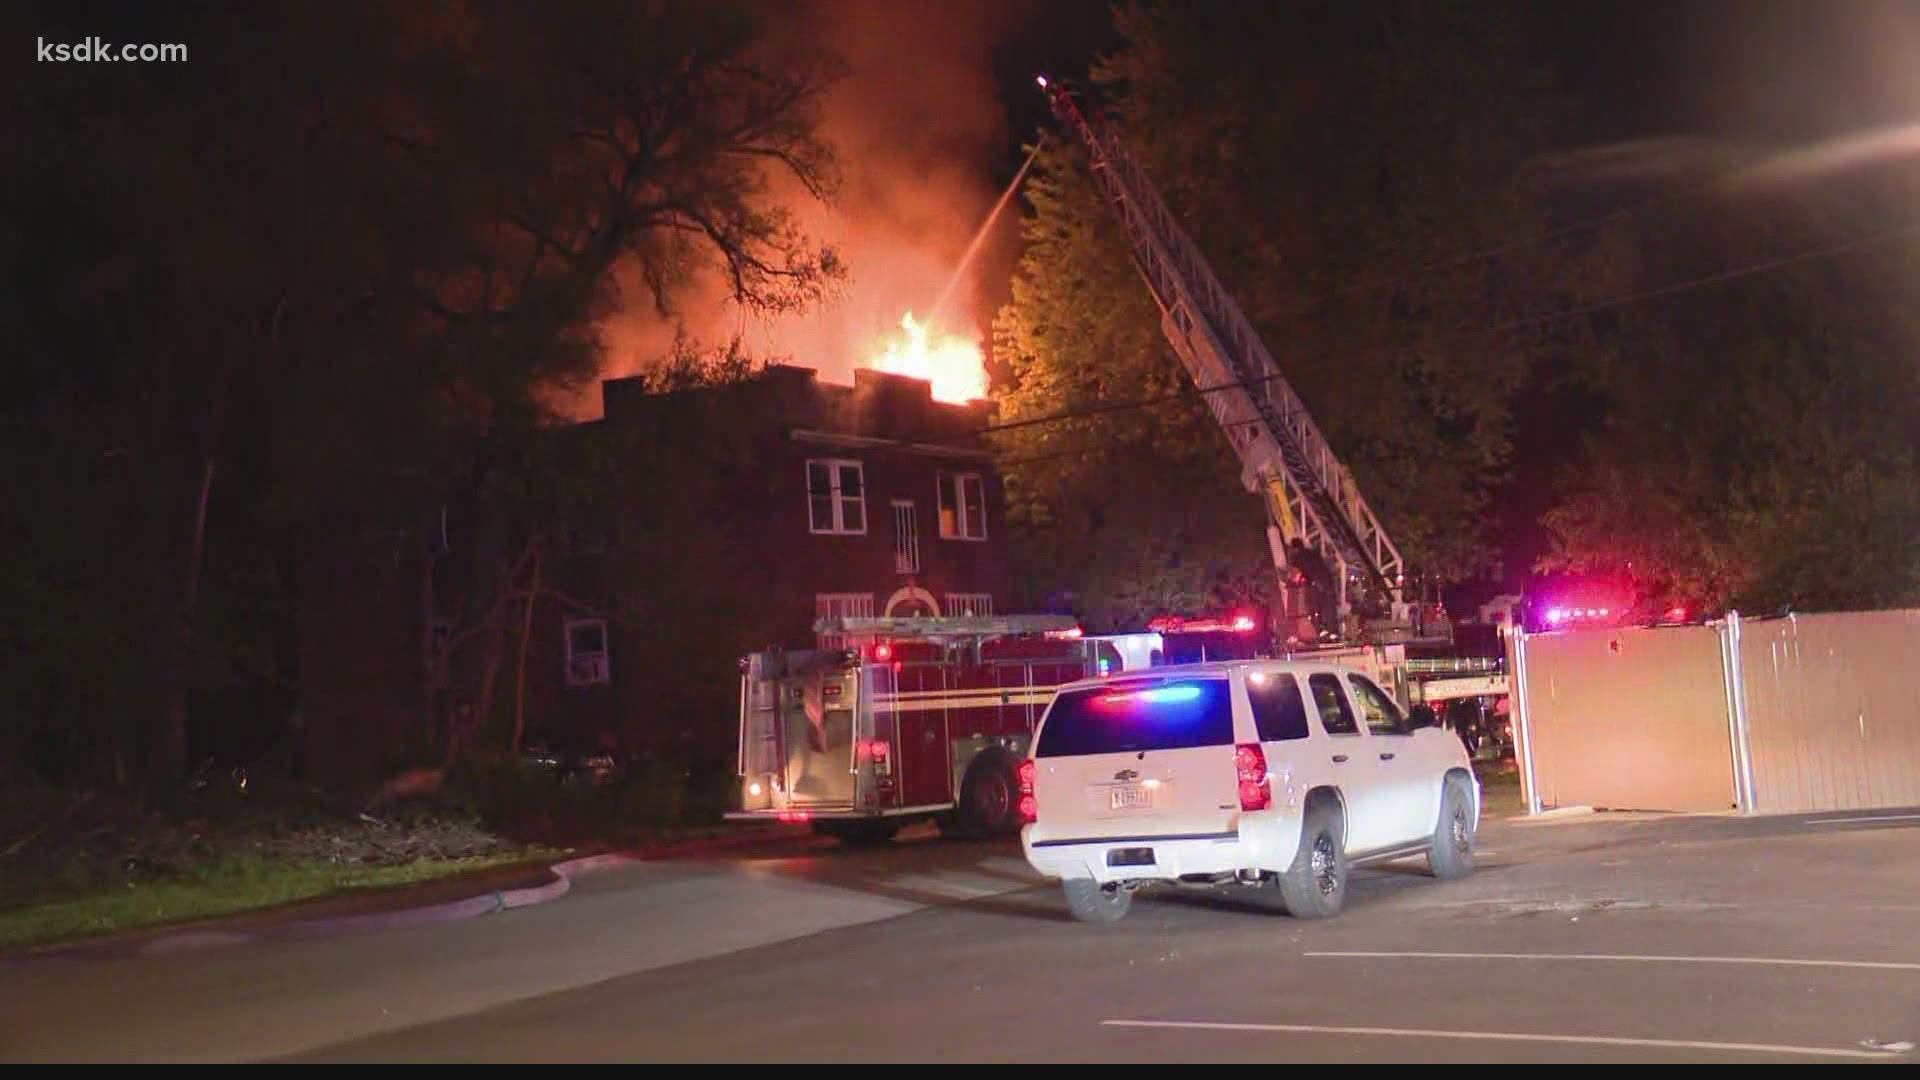 The fire happened early Thursday morning on 31st and State Street. There is no word on any injuries.